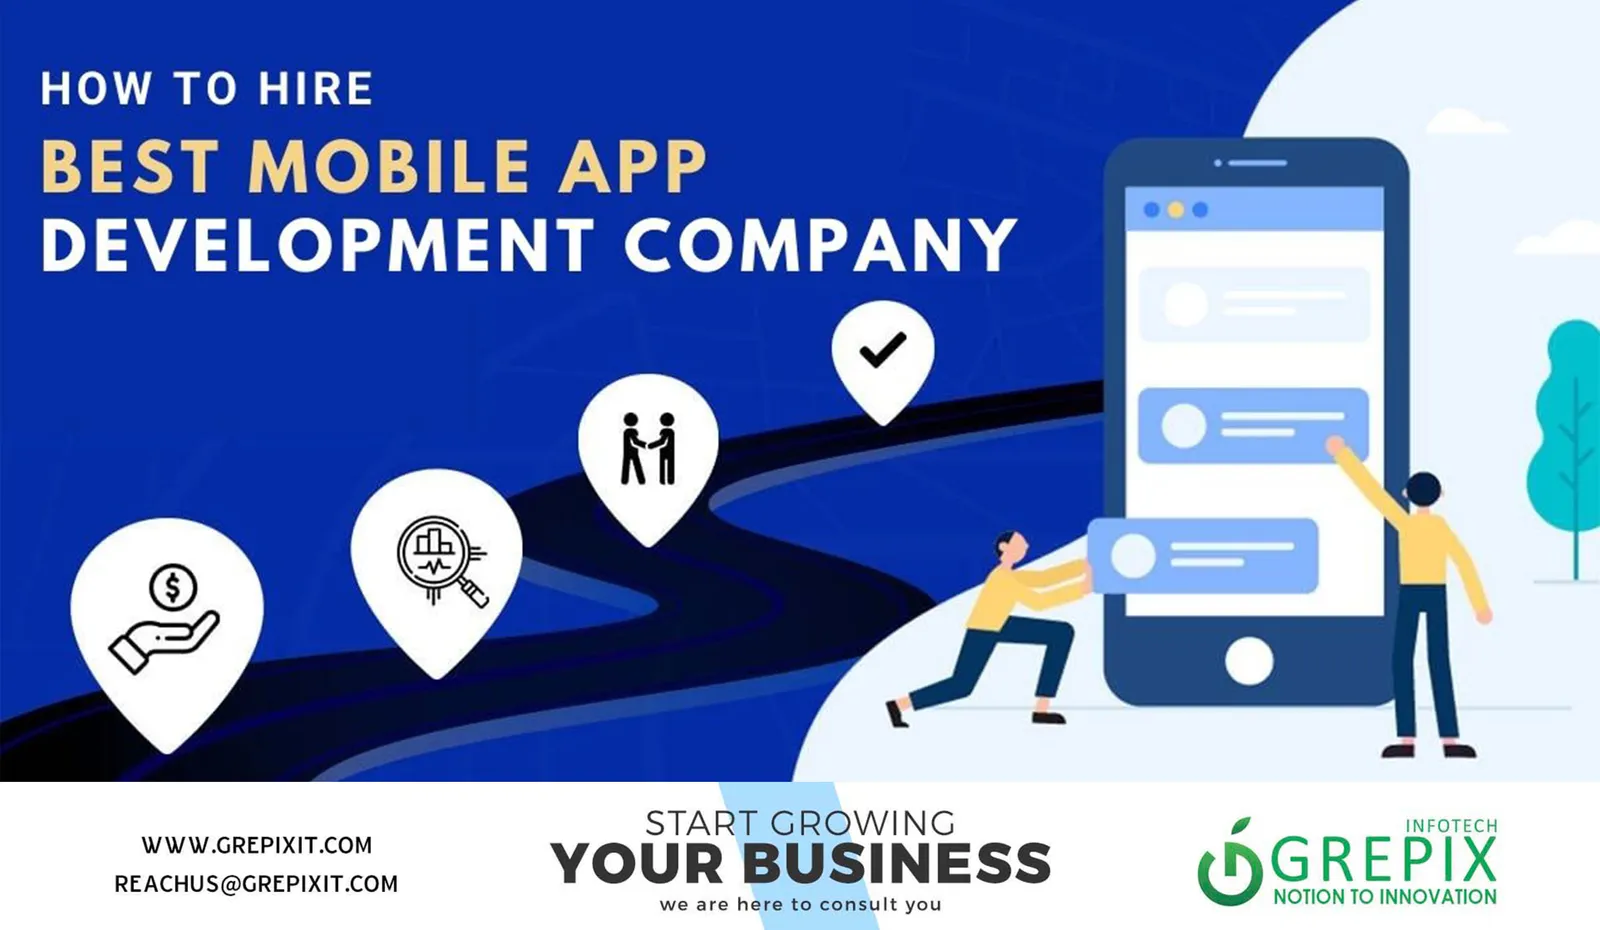 How to Hire Best Mobile App Development Company